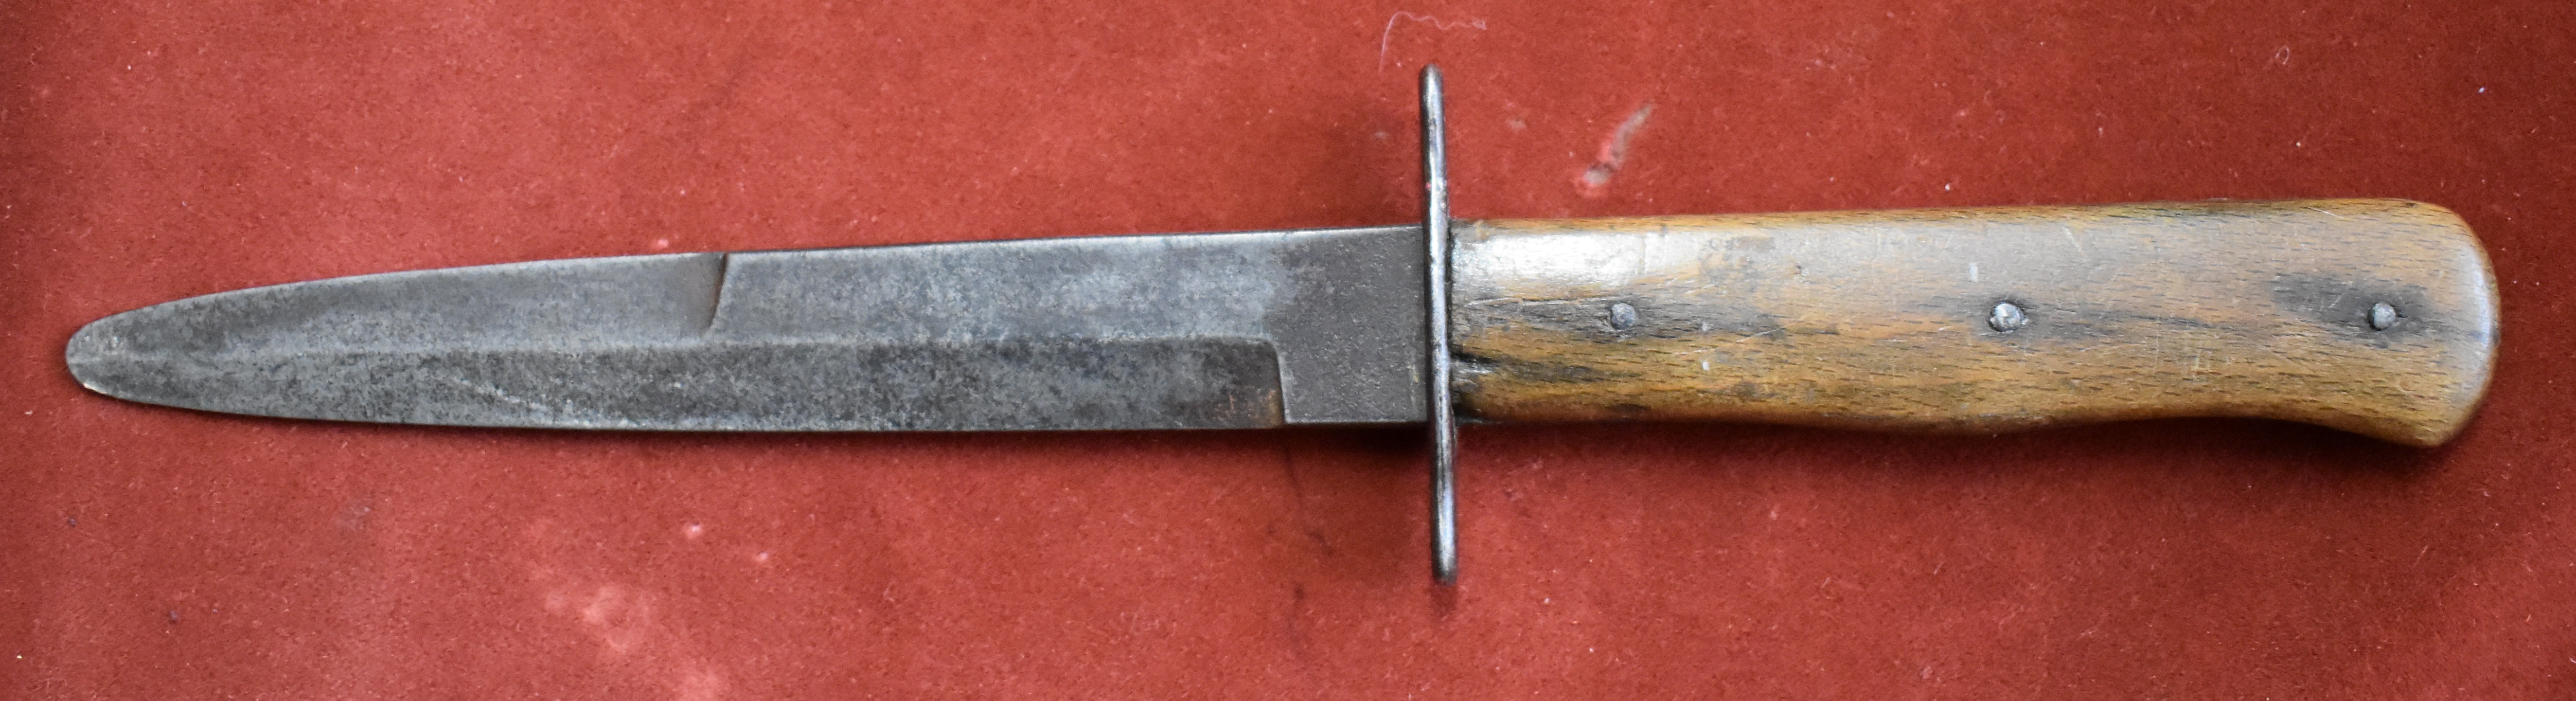 German WWII Luftwaffe Kampfmesser Boot Knife Trench Dagger, with makers mark on the blade.